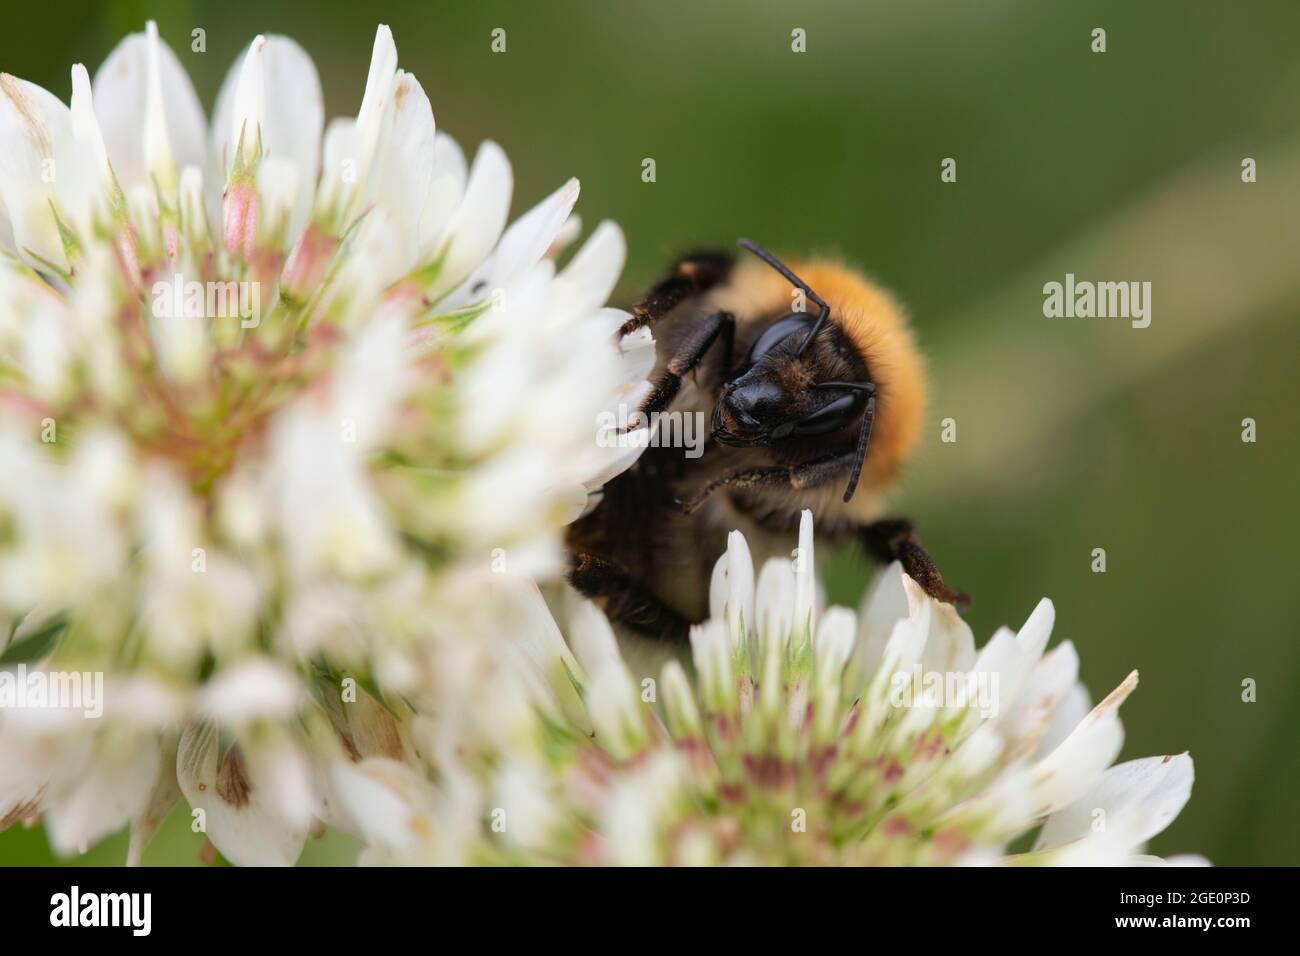 A Common Carder Bee (Bombus Pascuorum) Foraging on a White Clover Flower (Trifolium Repens) Stock Photo